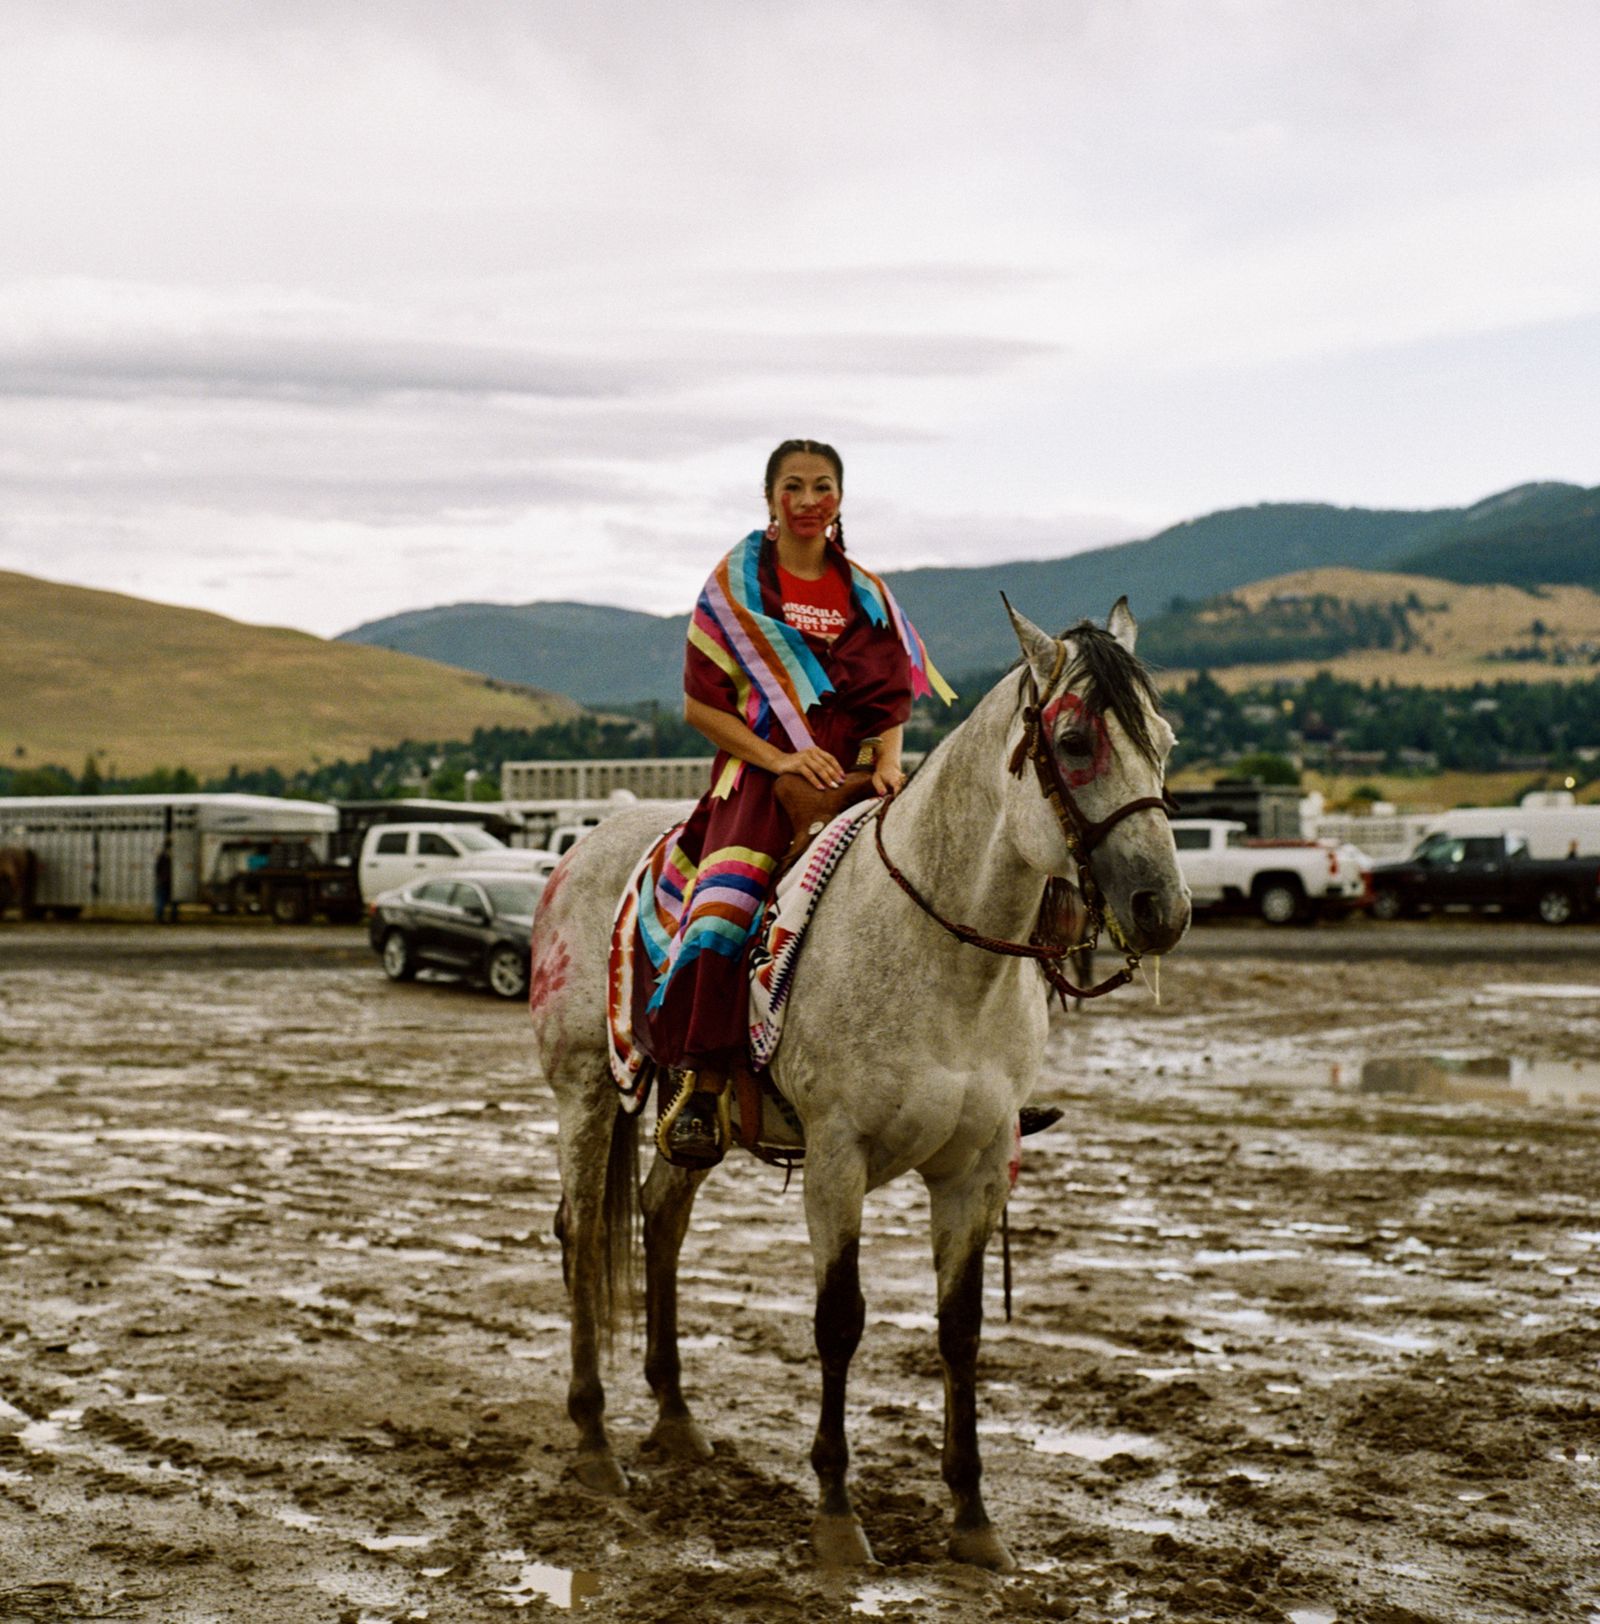 © Sara Hylton - An event for missing and murdered Native American women and girls at the Missoula state fair, Montana.